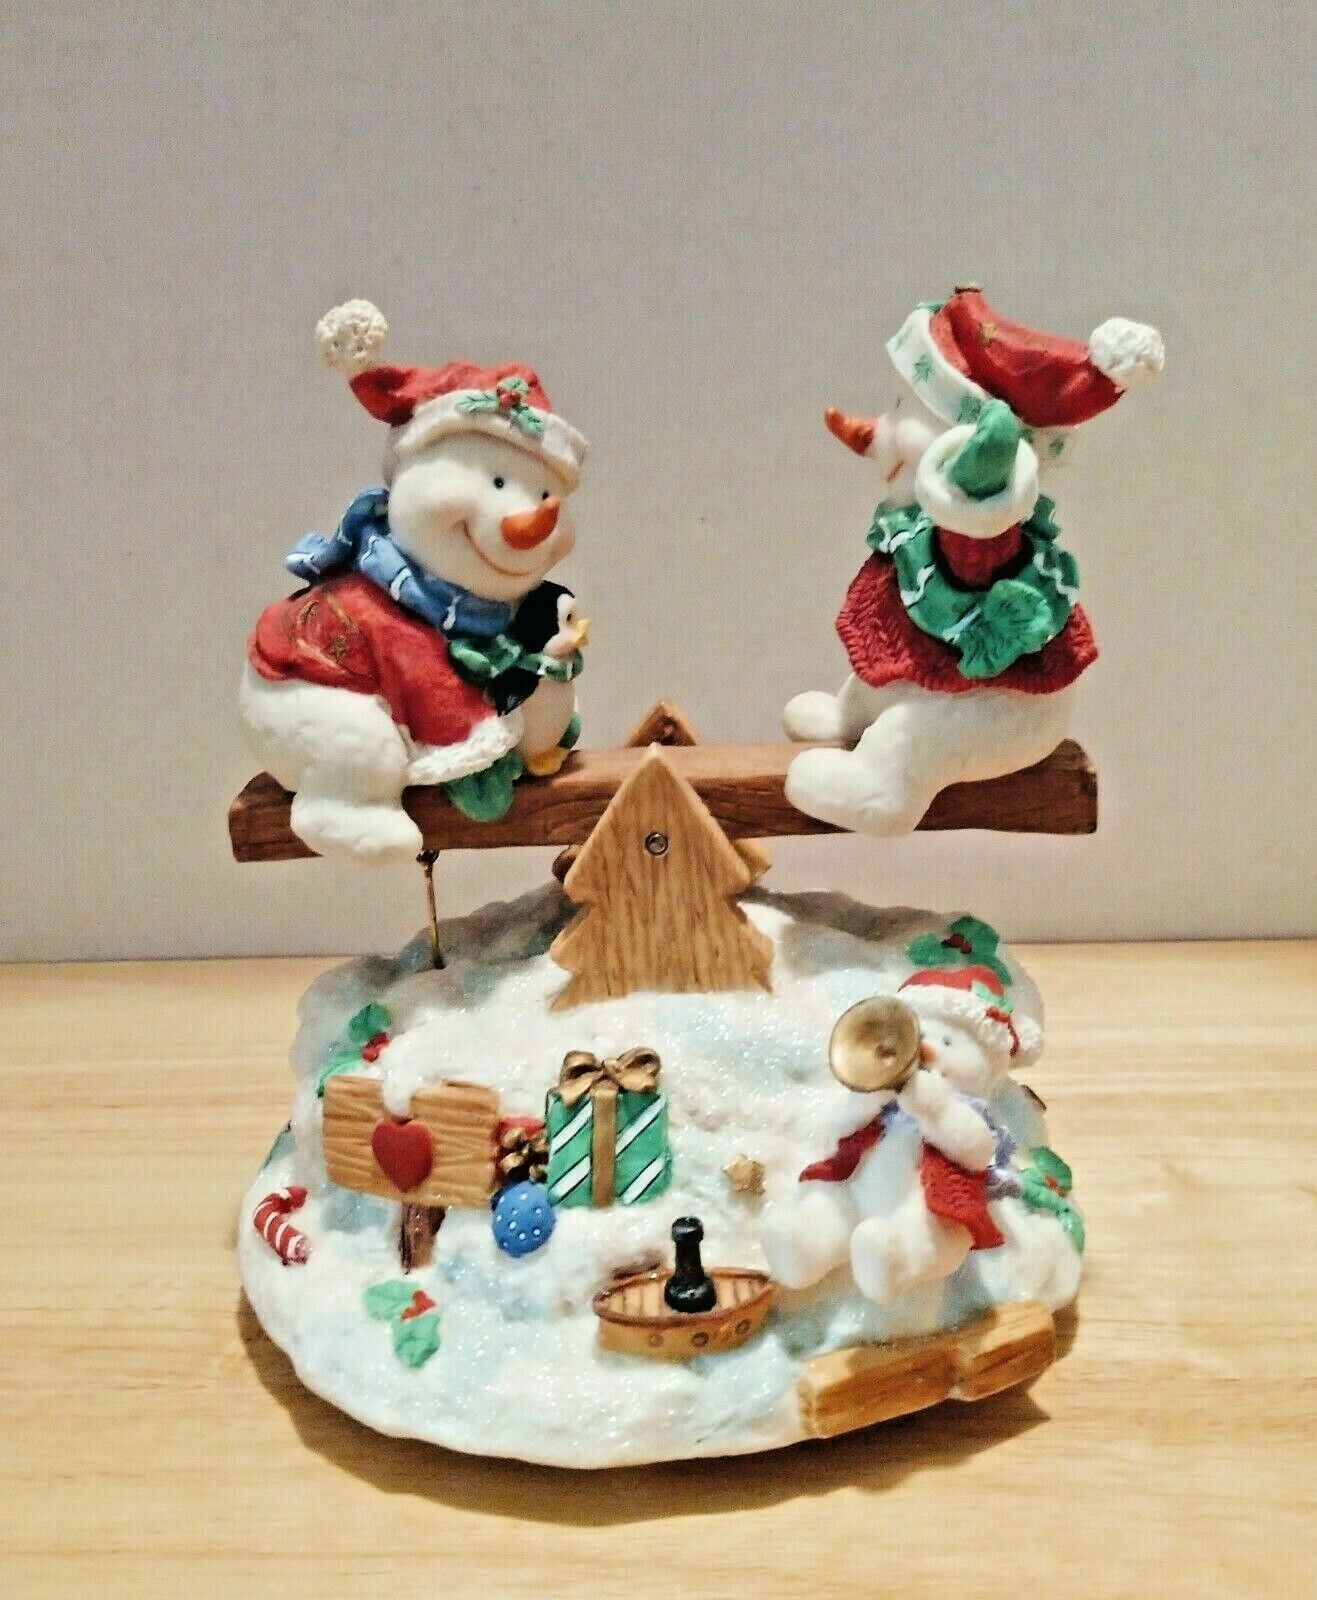 Vintage Snowman Music Box - Snow Men On Seesaw - Moves To The Music.